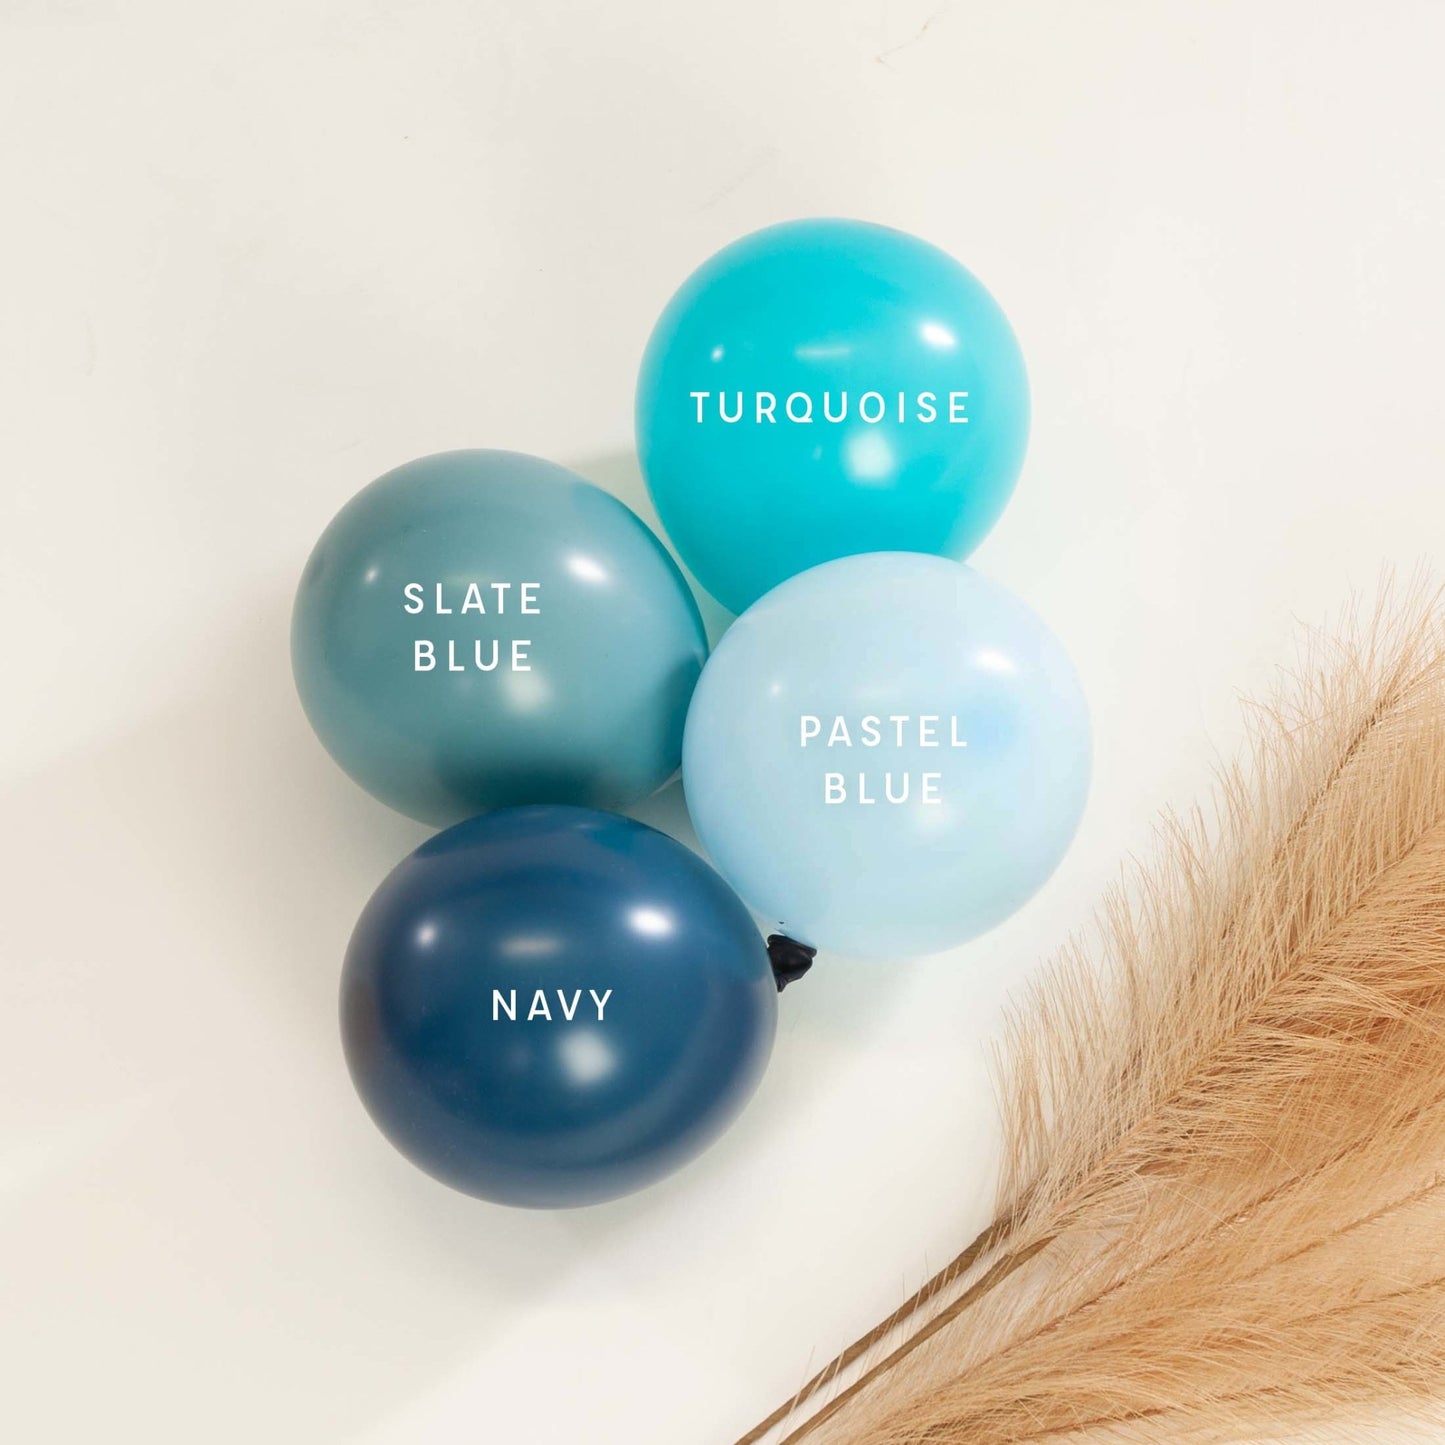 Premium Teal Turquoise Latex Balloon Packs (5", 11”, and 24”) - Ellie's Party Supply